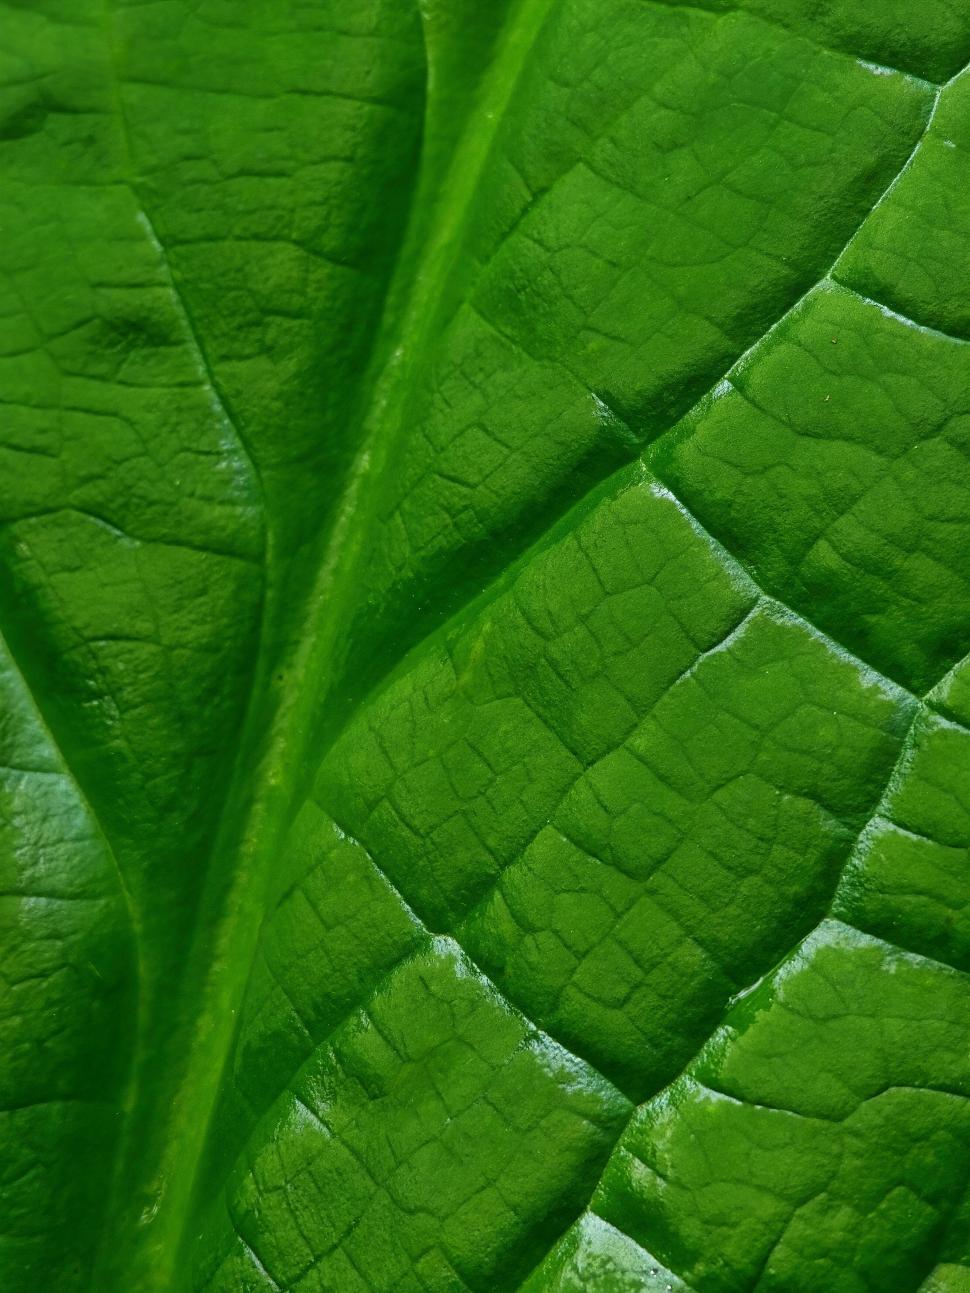 Free Image of Veiny texture of a vibrant green leaf 